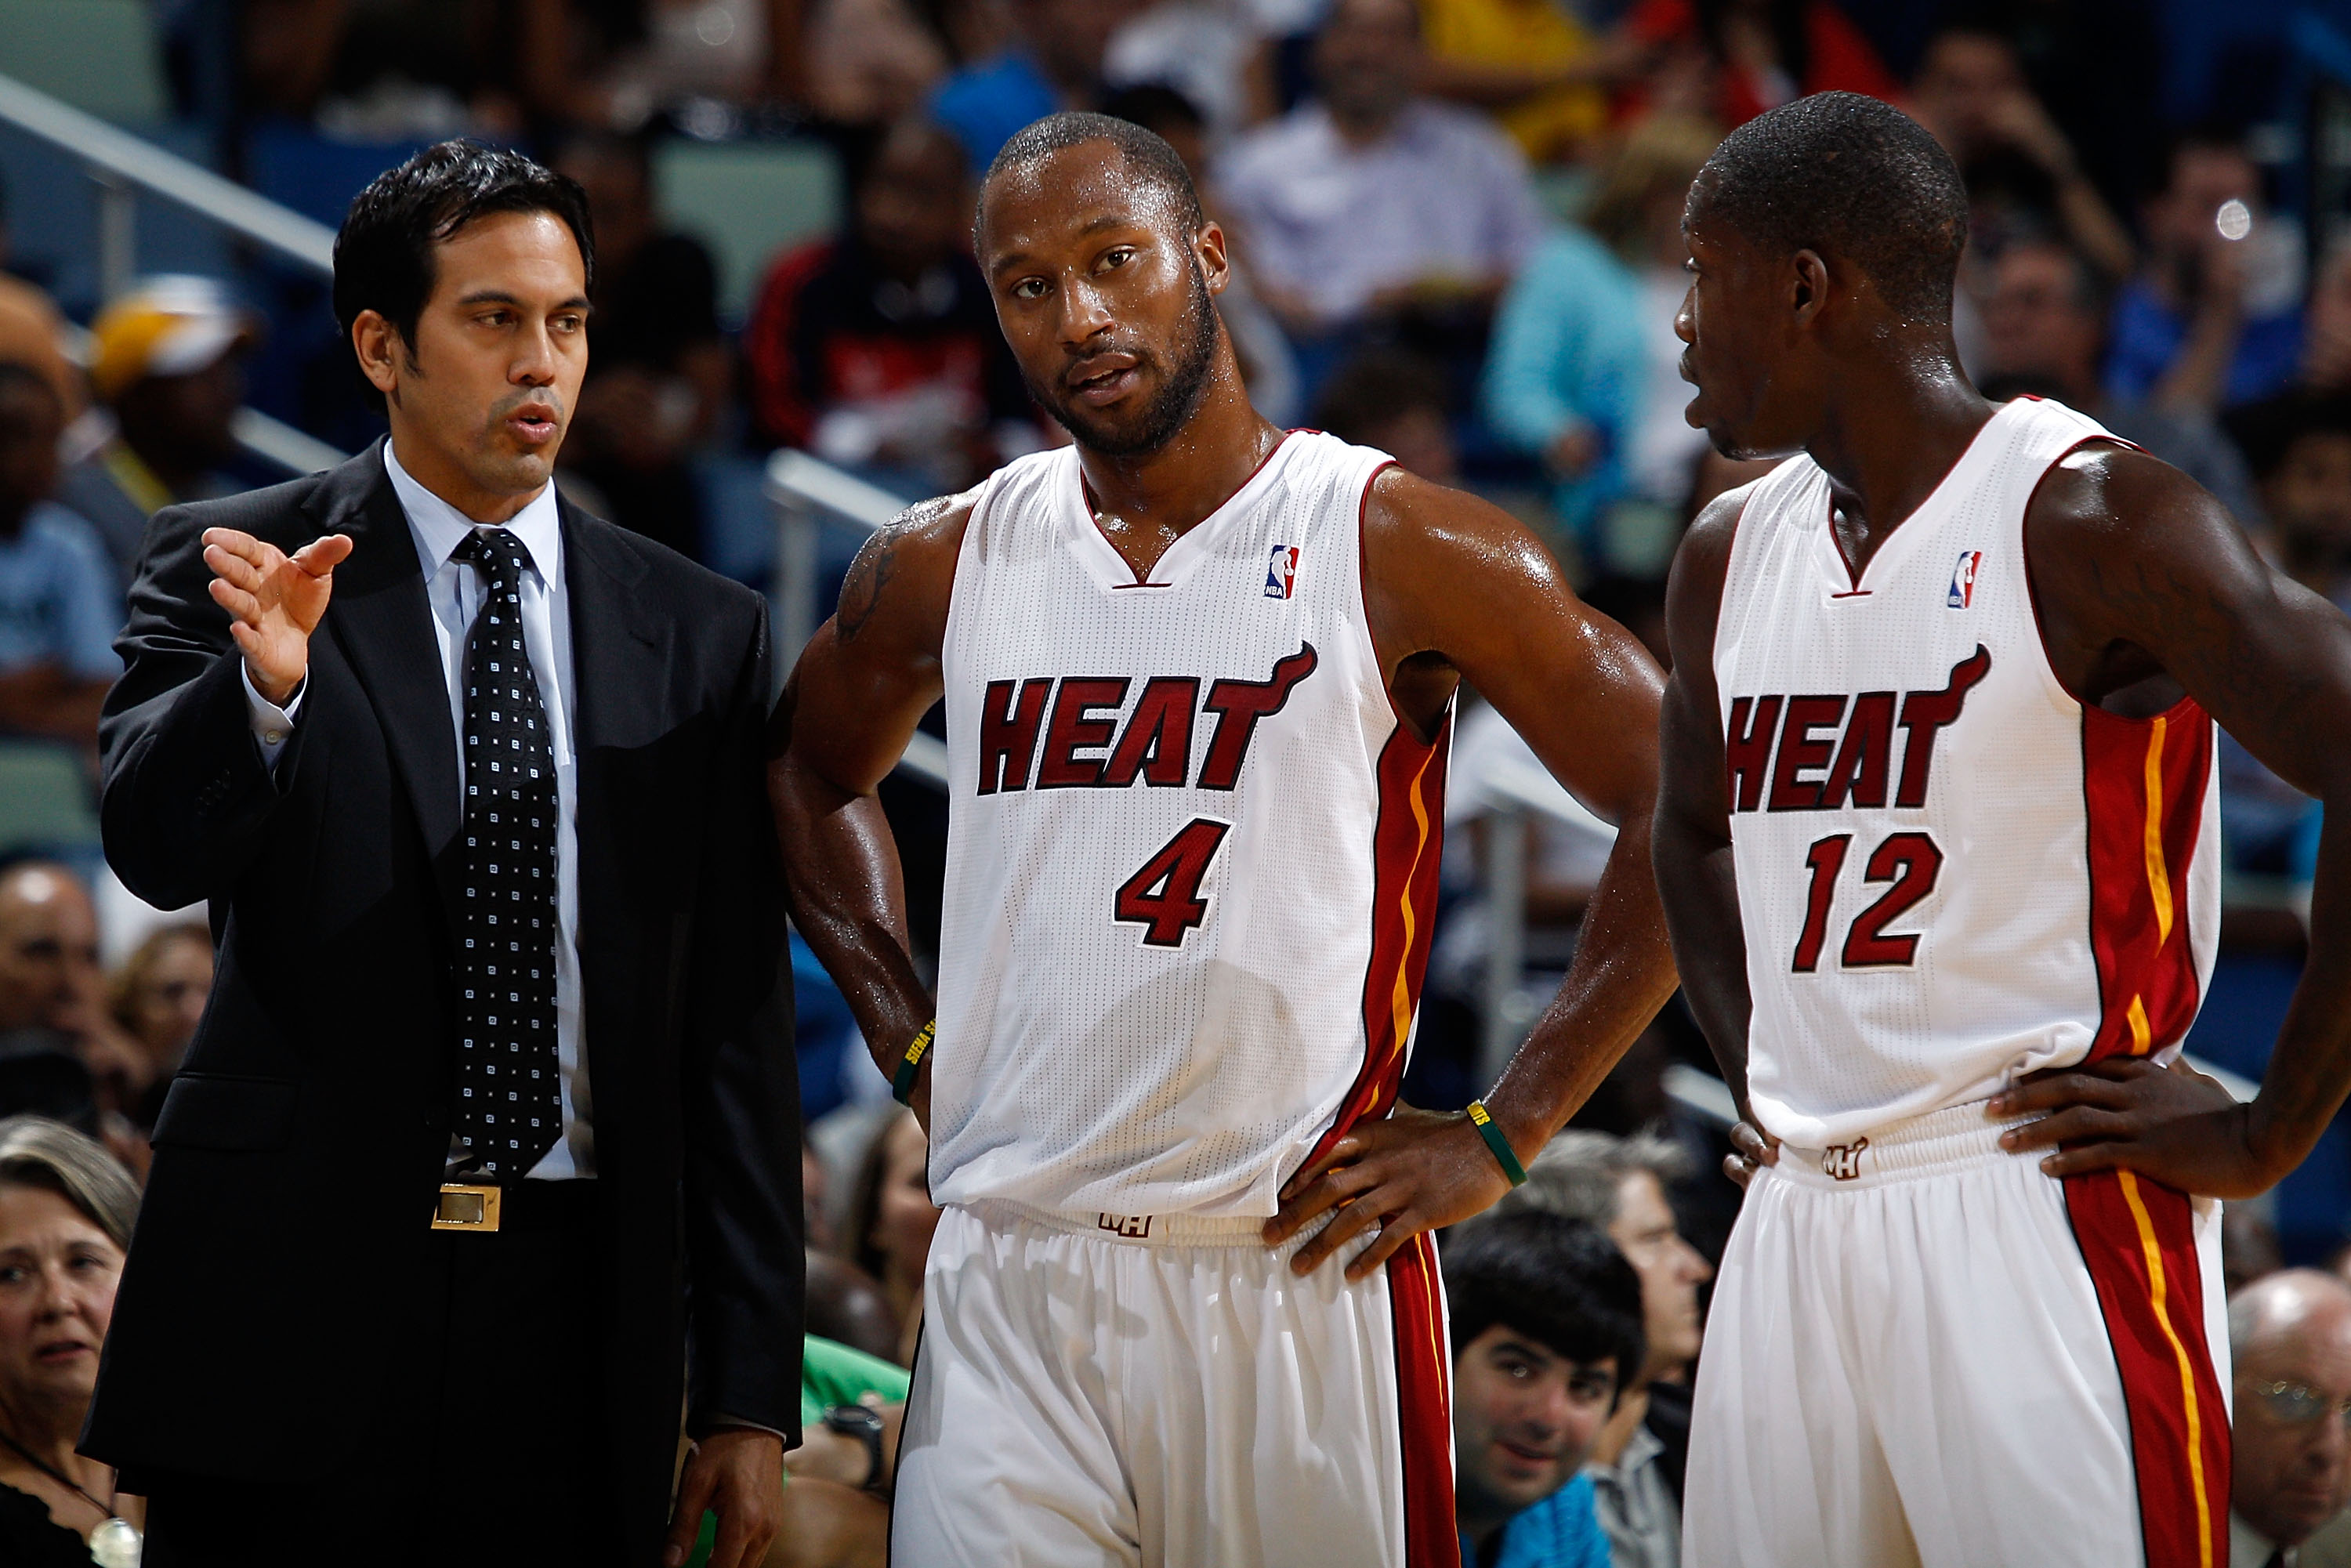 NEW ORLEANS - OCTOBER 13:  Head coach Erik Spoelstra talks with Kenny Hasbrouck #4 and Patrick Beverley #12 of the Miami Heat during the game against the New Orleans Hornets at the New Orleans Arena on October 13, 2010 in New Orleans, Louisiana.  NOTE TO